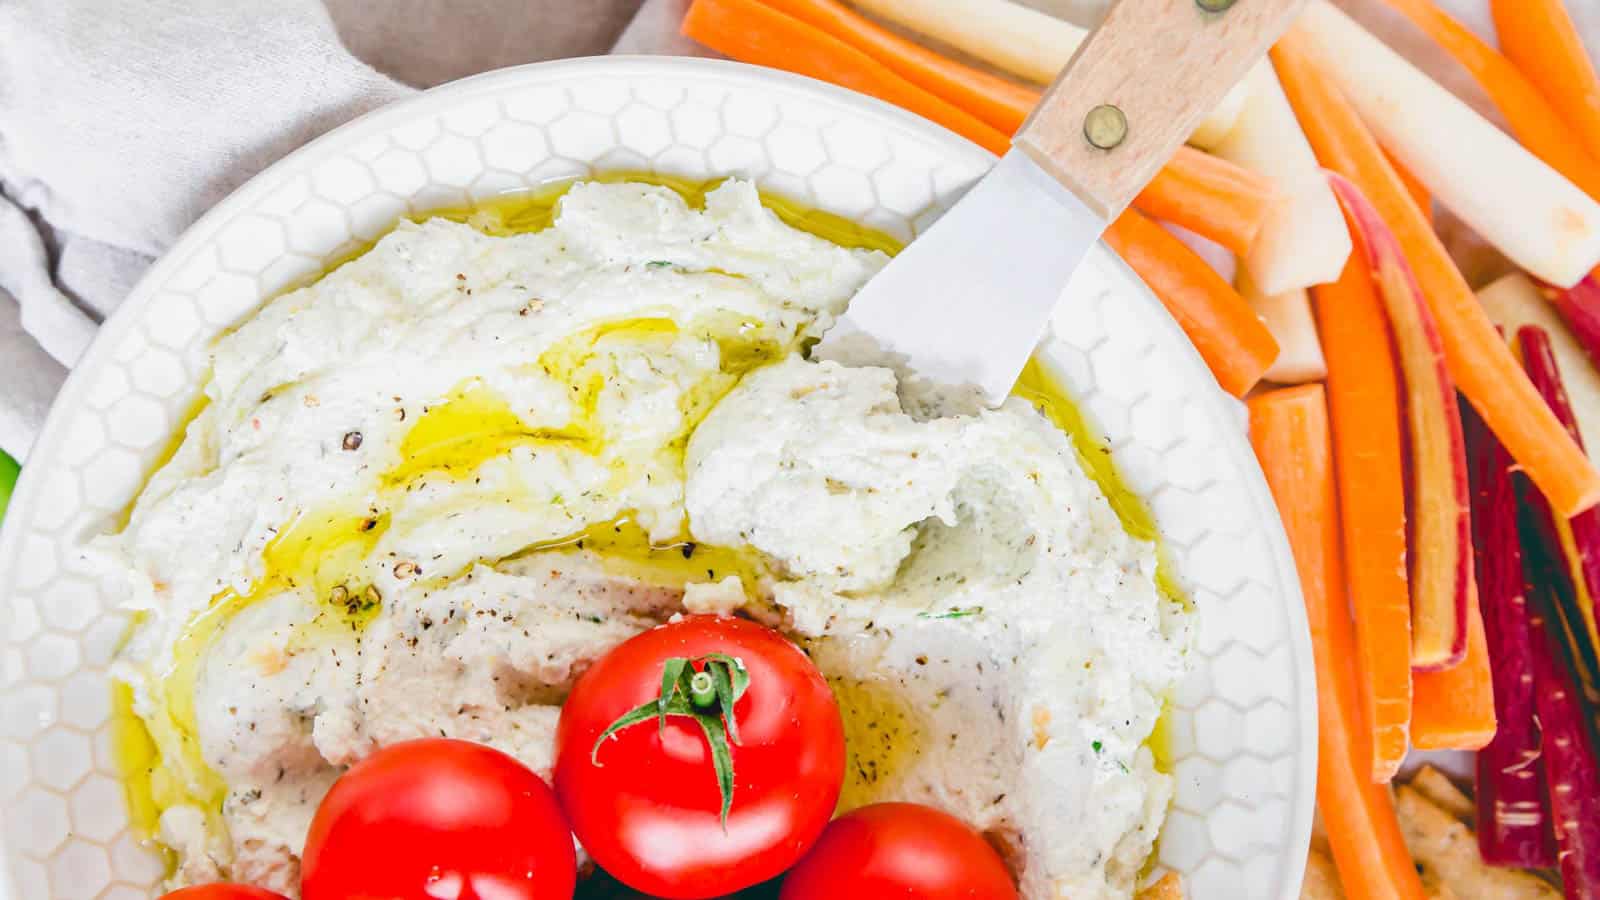 Whipped goat cheese dip topped with olive oil in a bowl with cherry tomatoes and a cheese spreader.